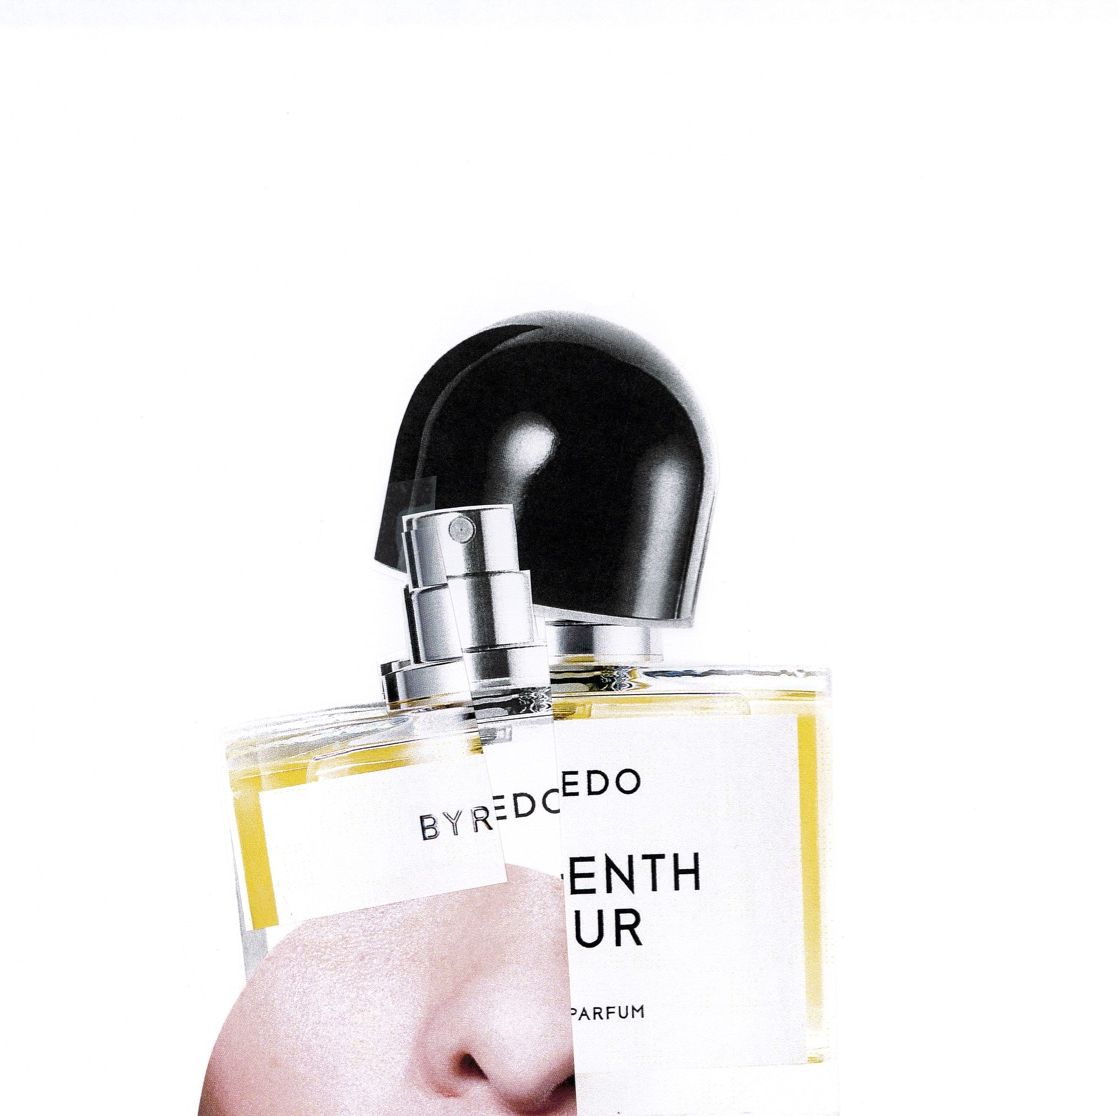 Smells Like Mean Spirit: Are You A Scent Snob?